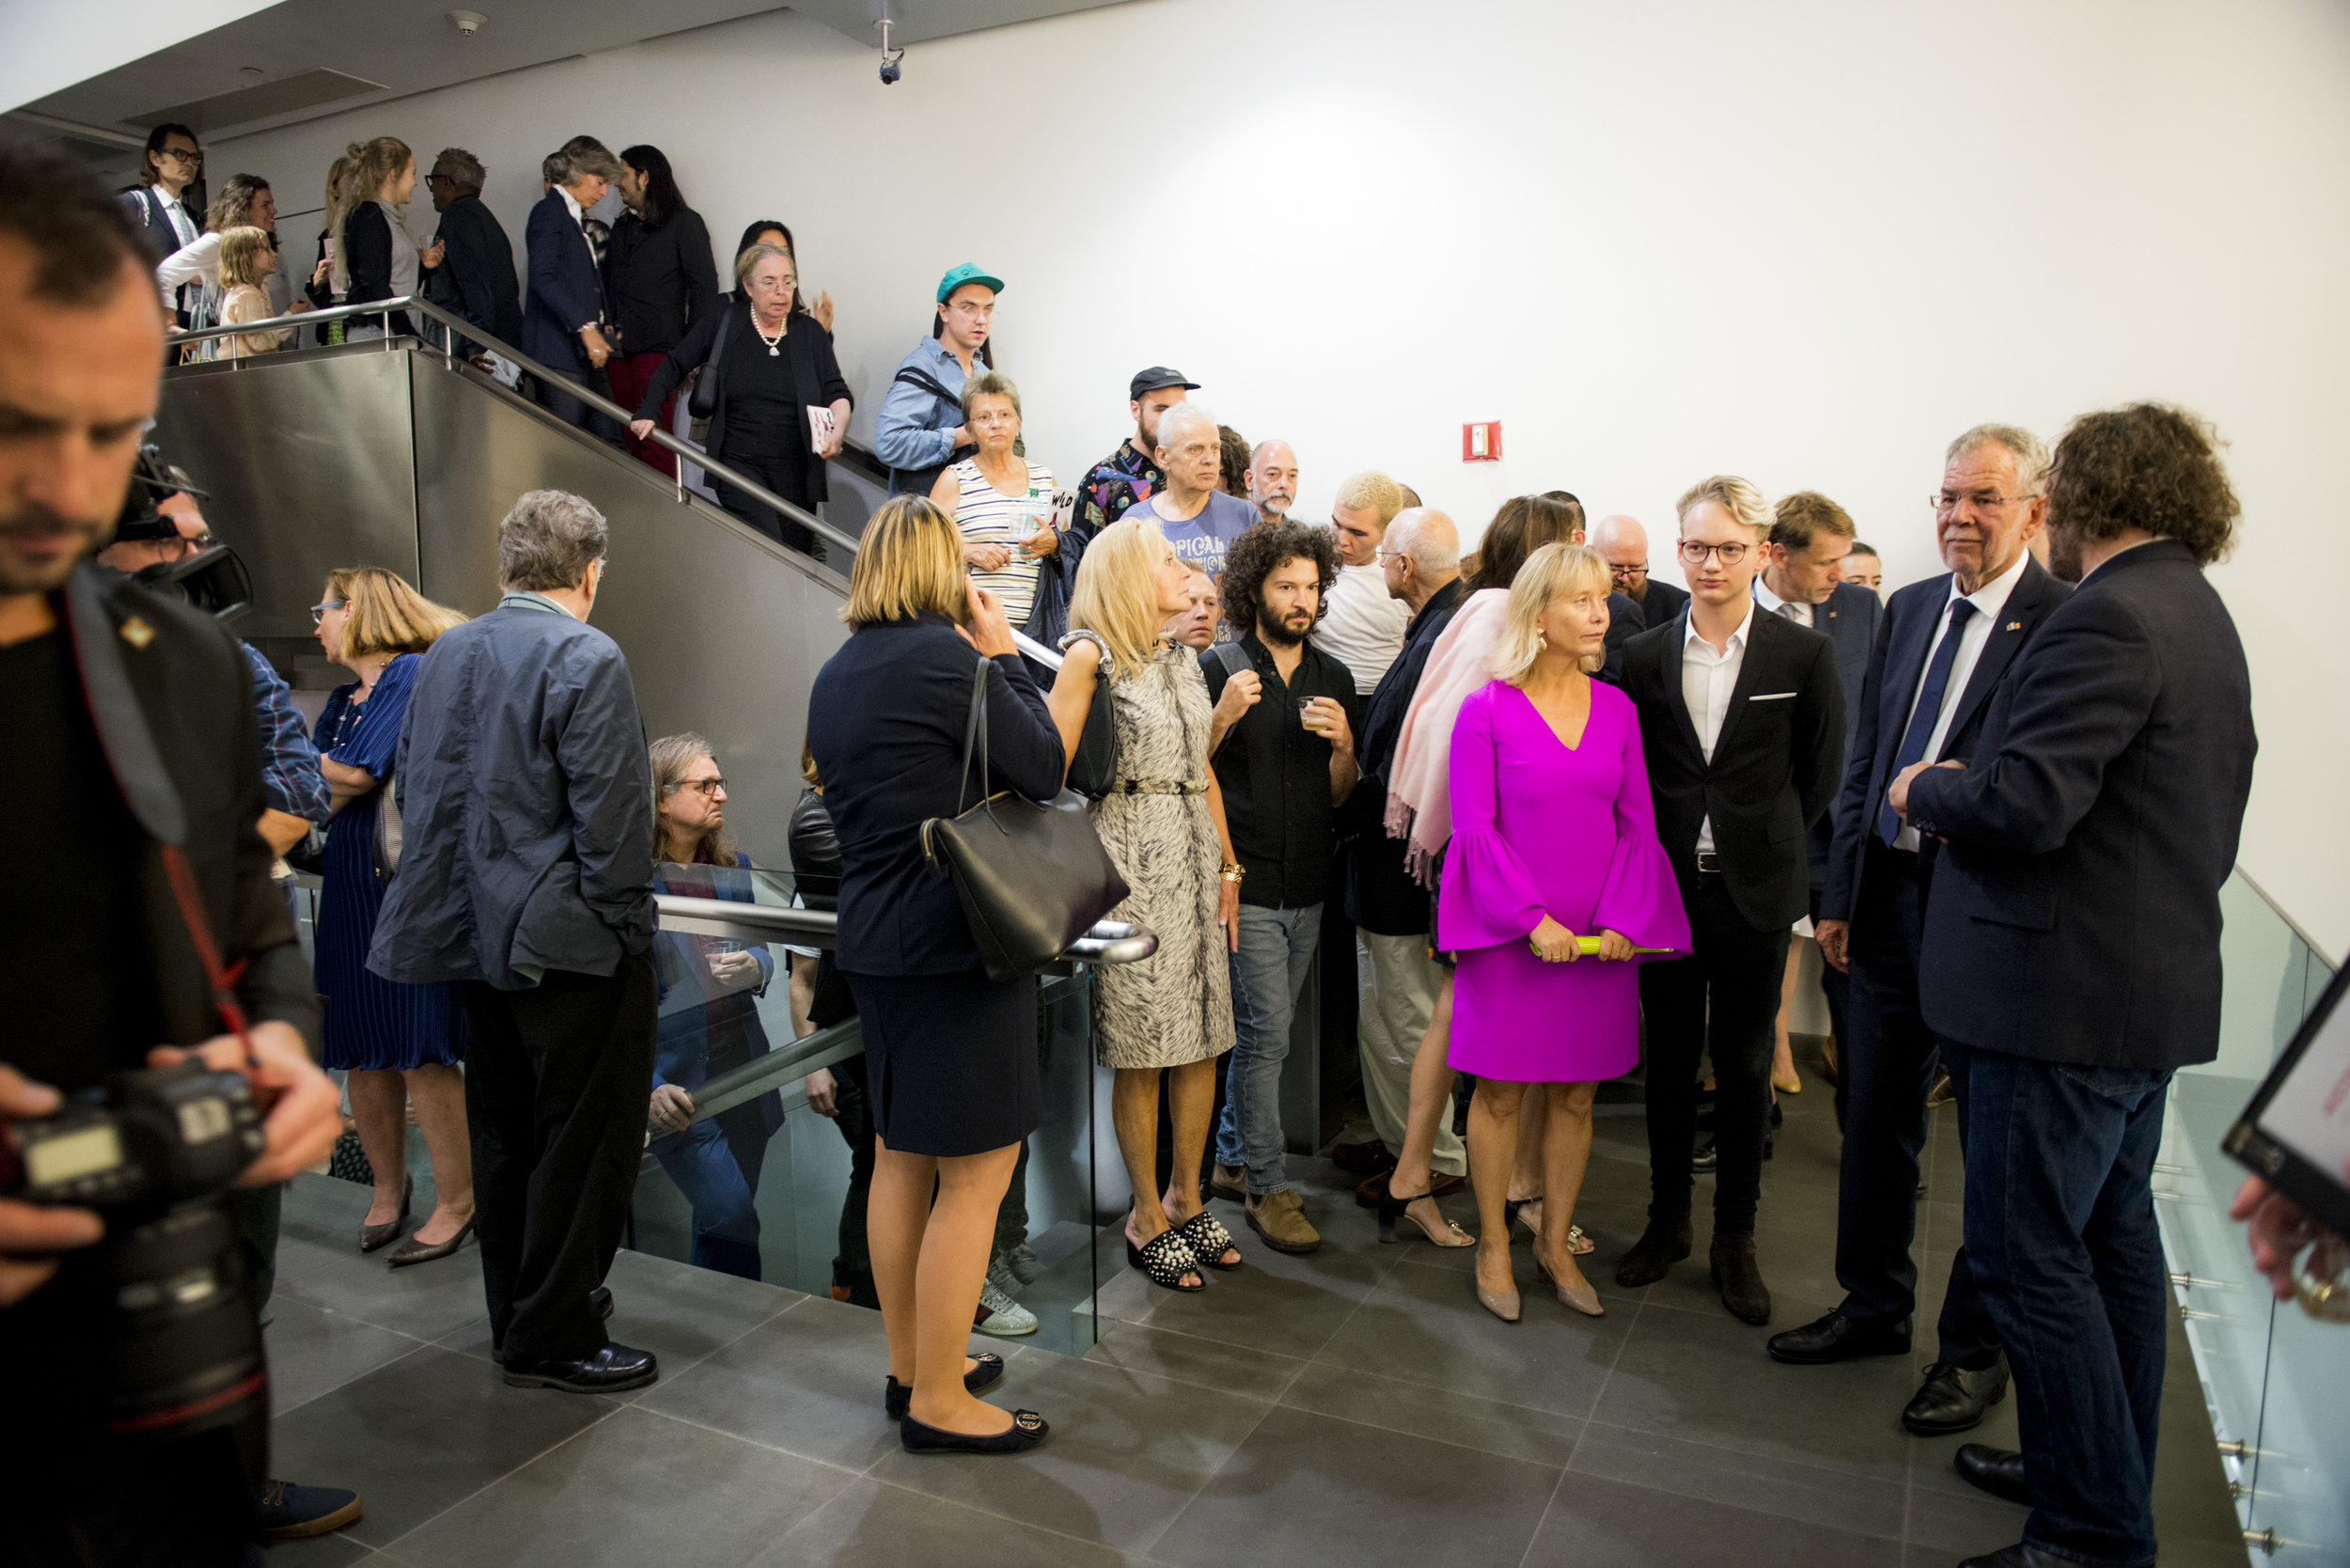   WILD WEST  Opening Reception, September 19, 2017, at the Austrian Cultural Forum New York, Photo: David Plakke/ACFNY 